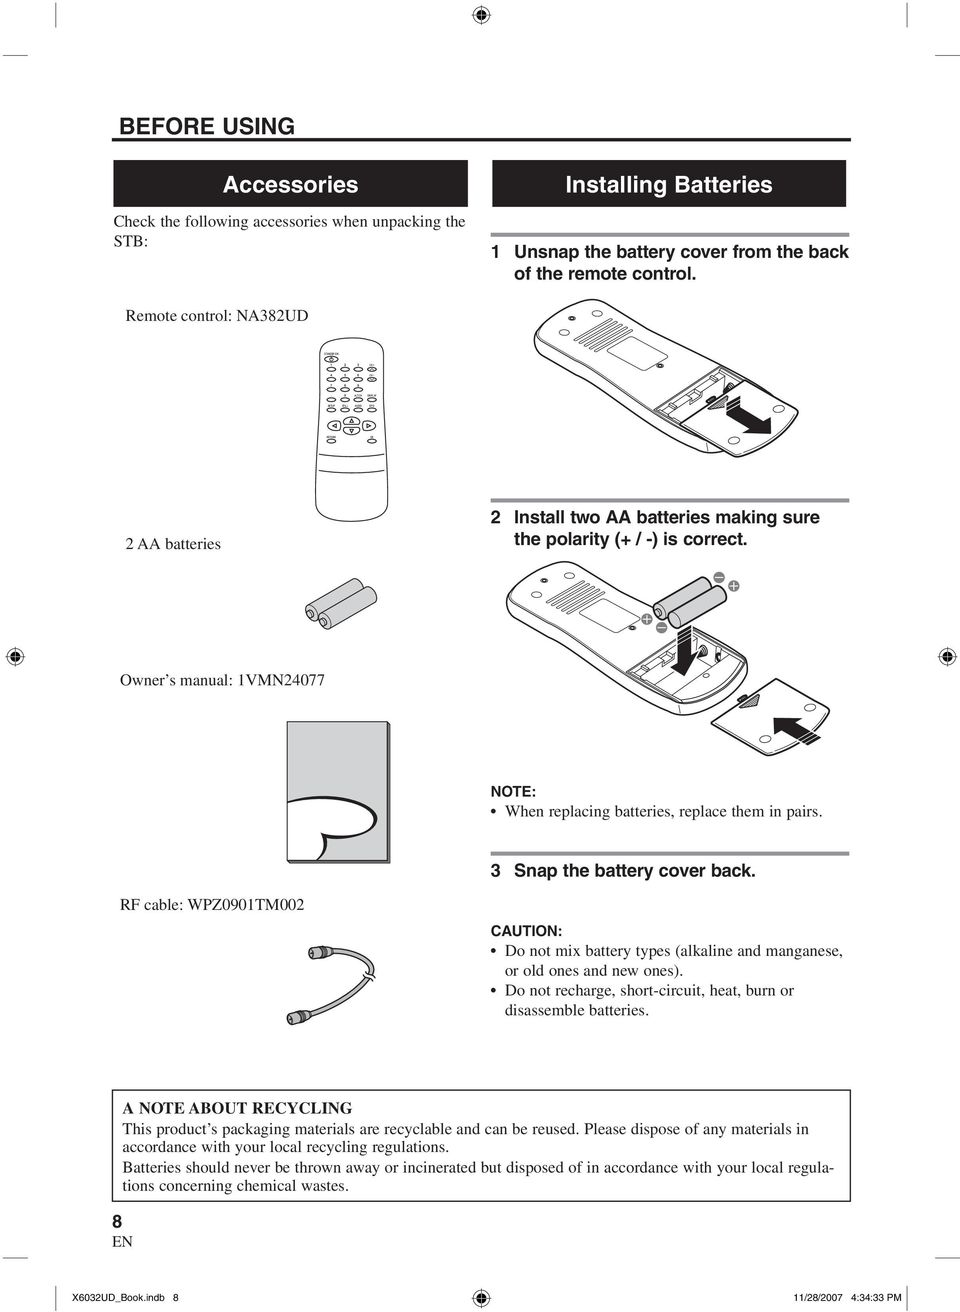 Owner s manual: 1VMN24077 When replacing batteries, replace them in pairs. 3 Snap the battery cover back.